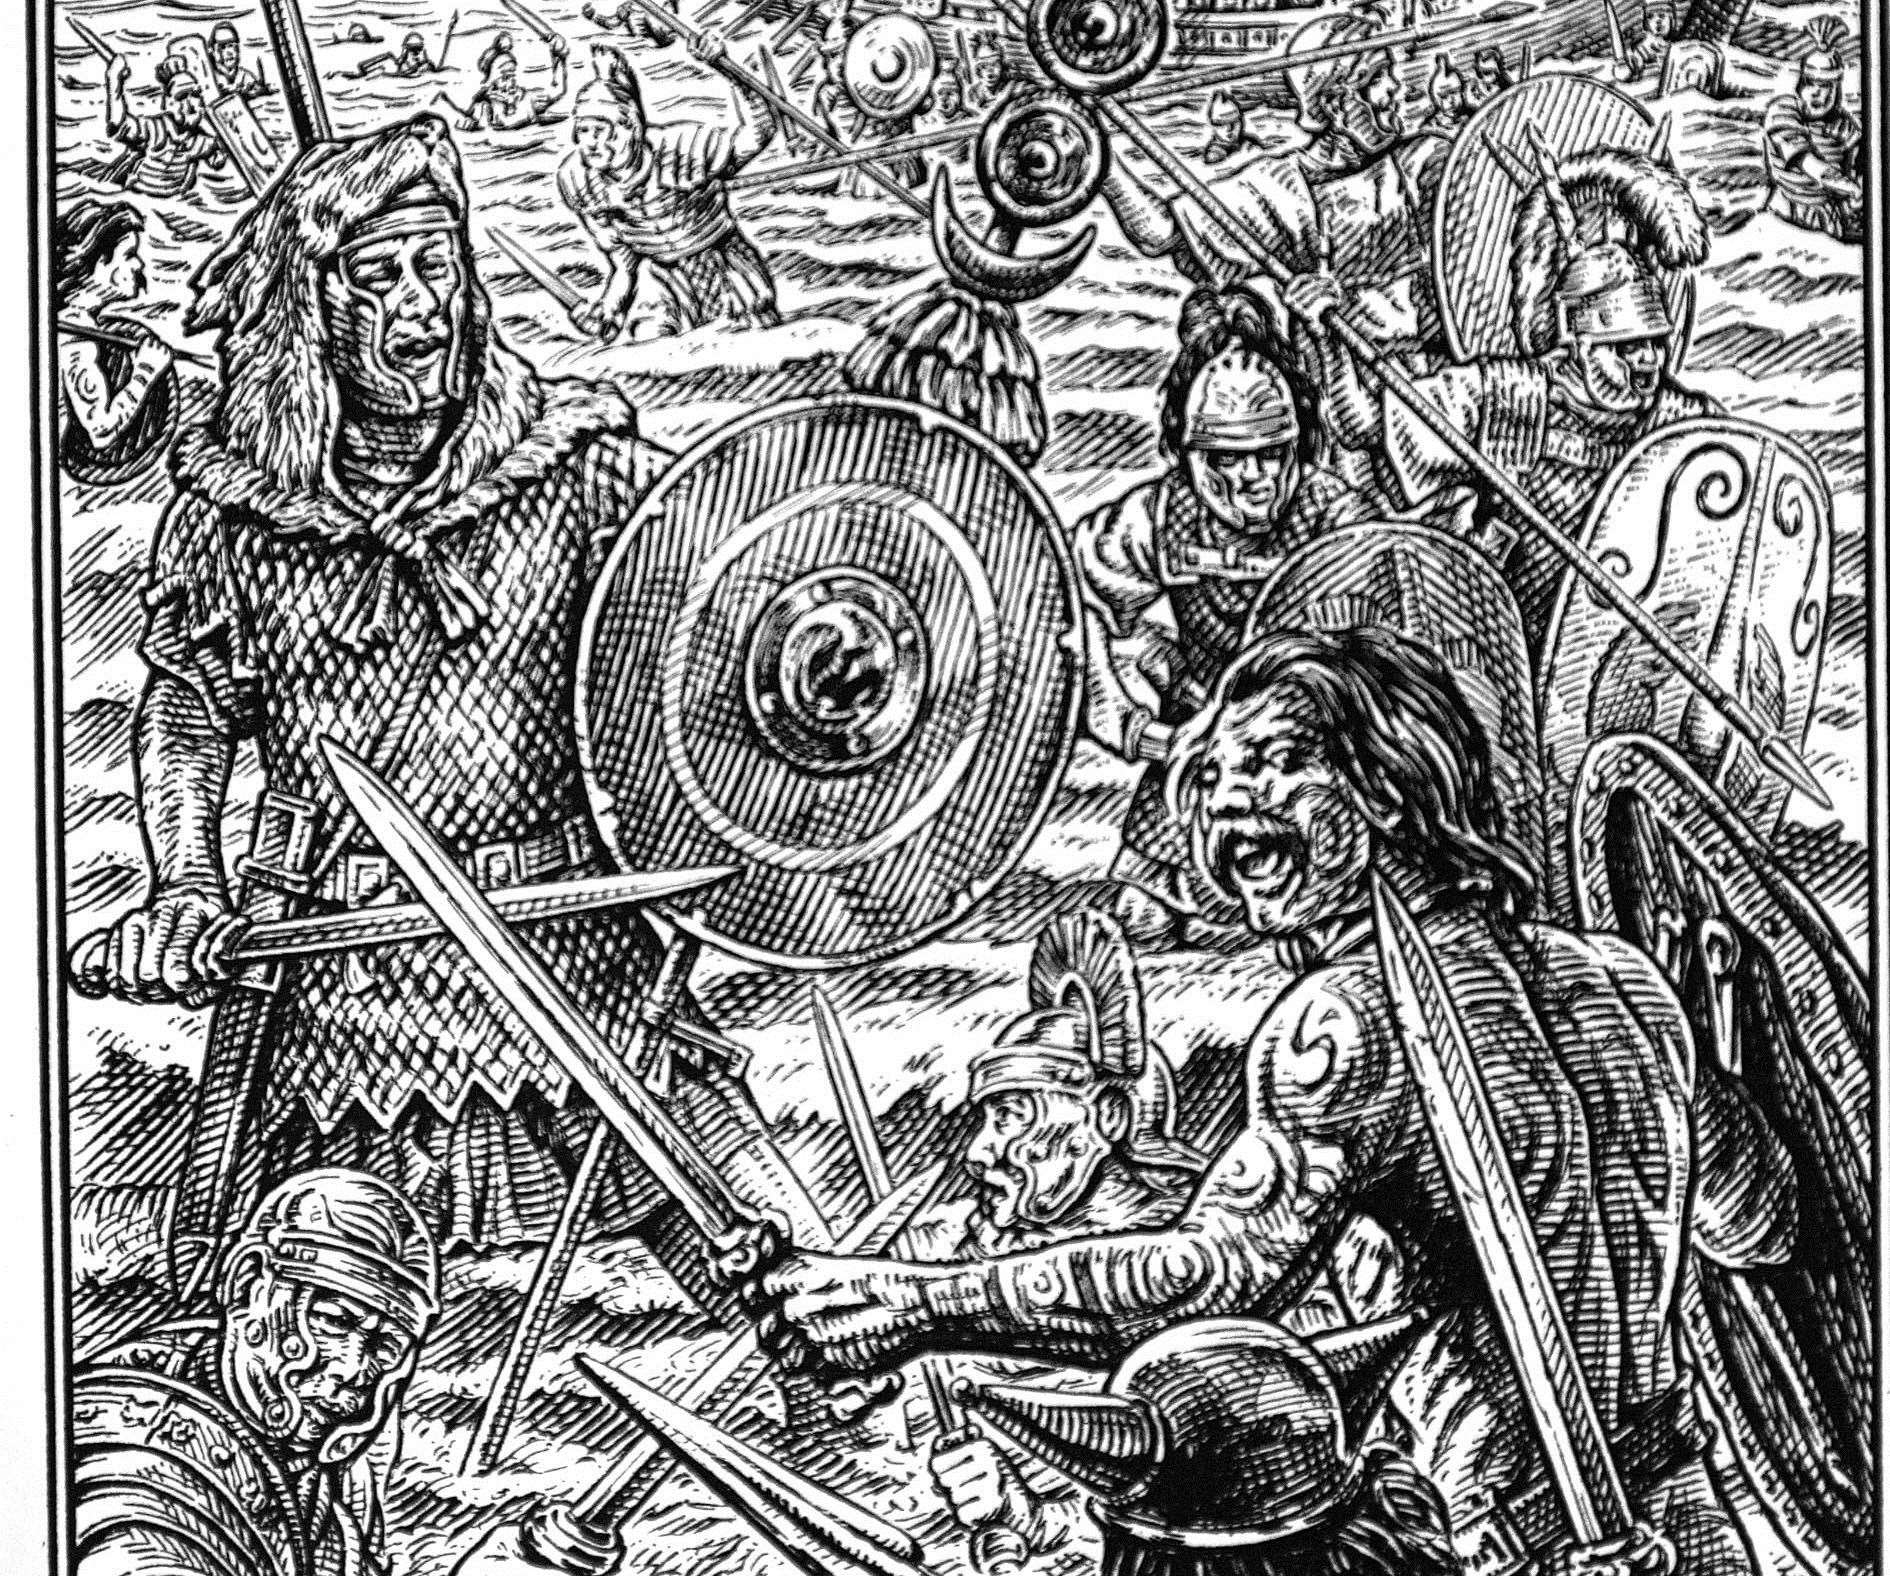 Deal artist David Hopkins gives his idea of the Roman invasion in 55BC